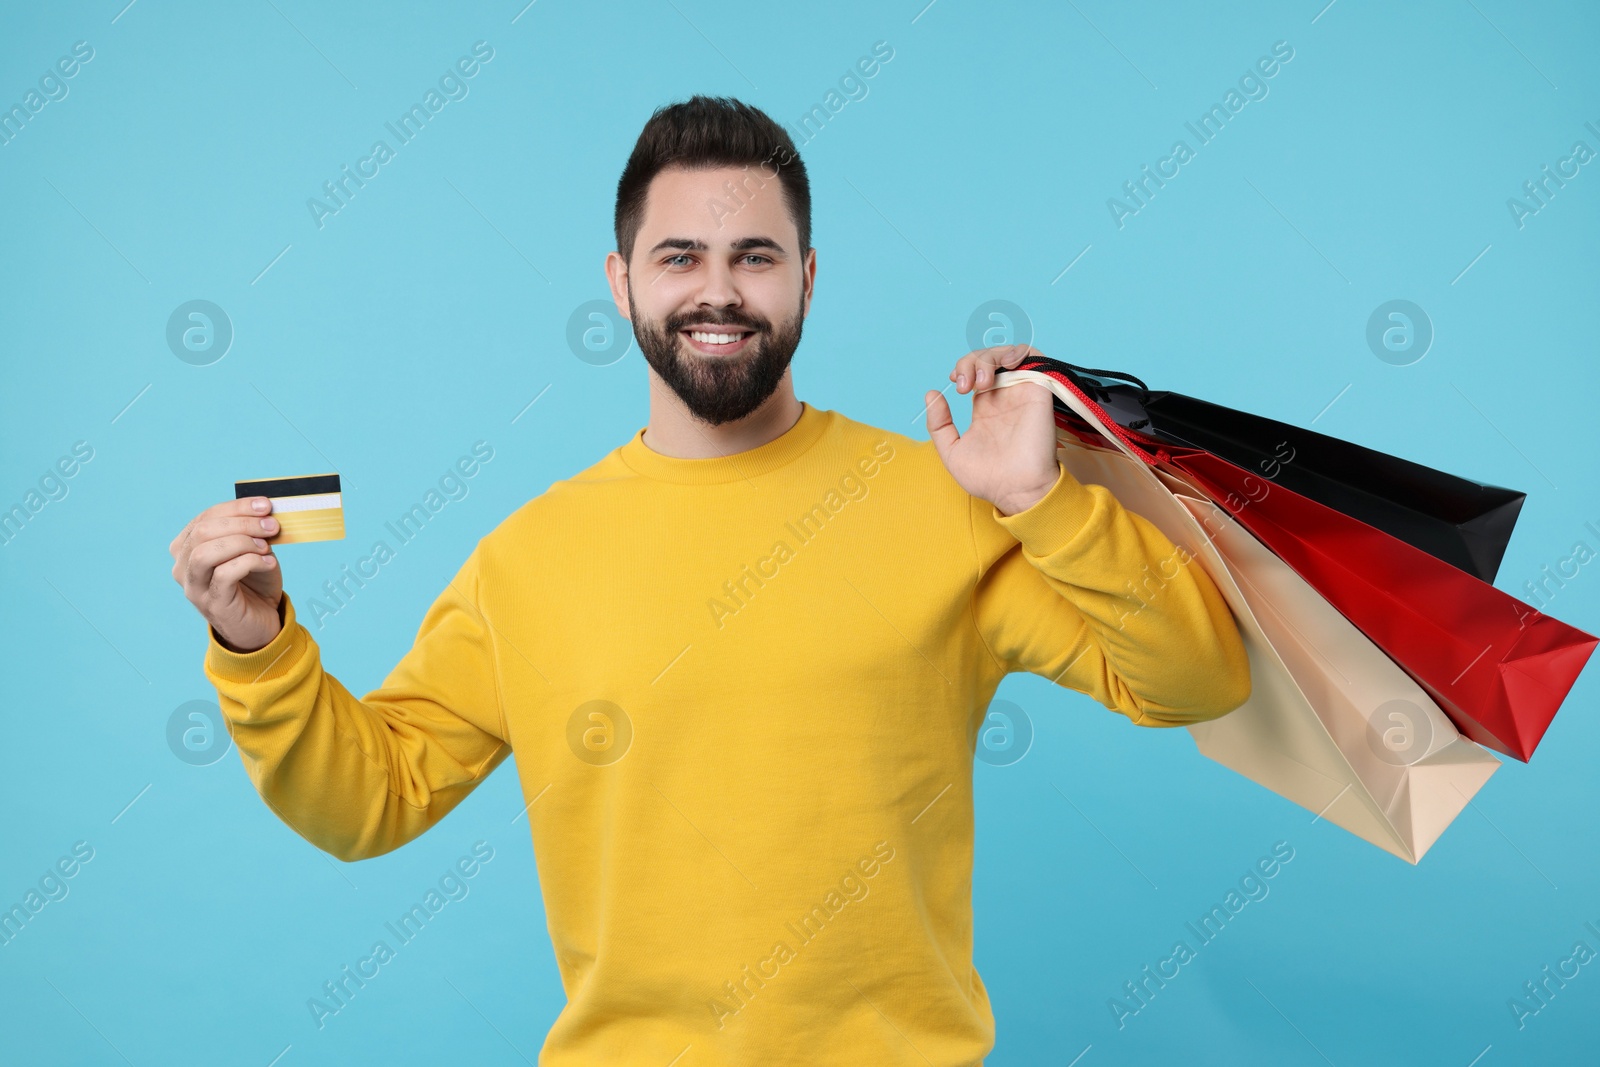 Photo of Smiling man with paper shopping bags showing credit card on light blue background